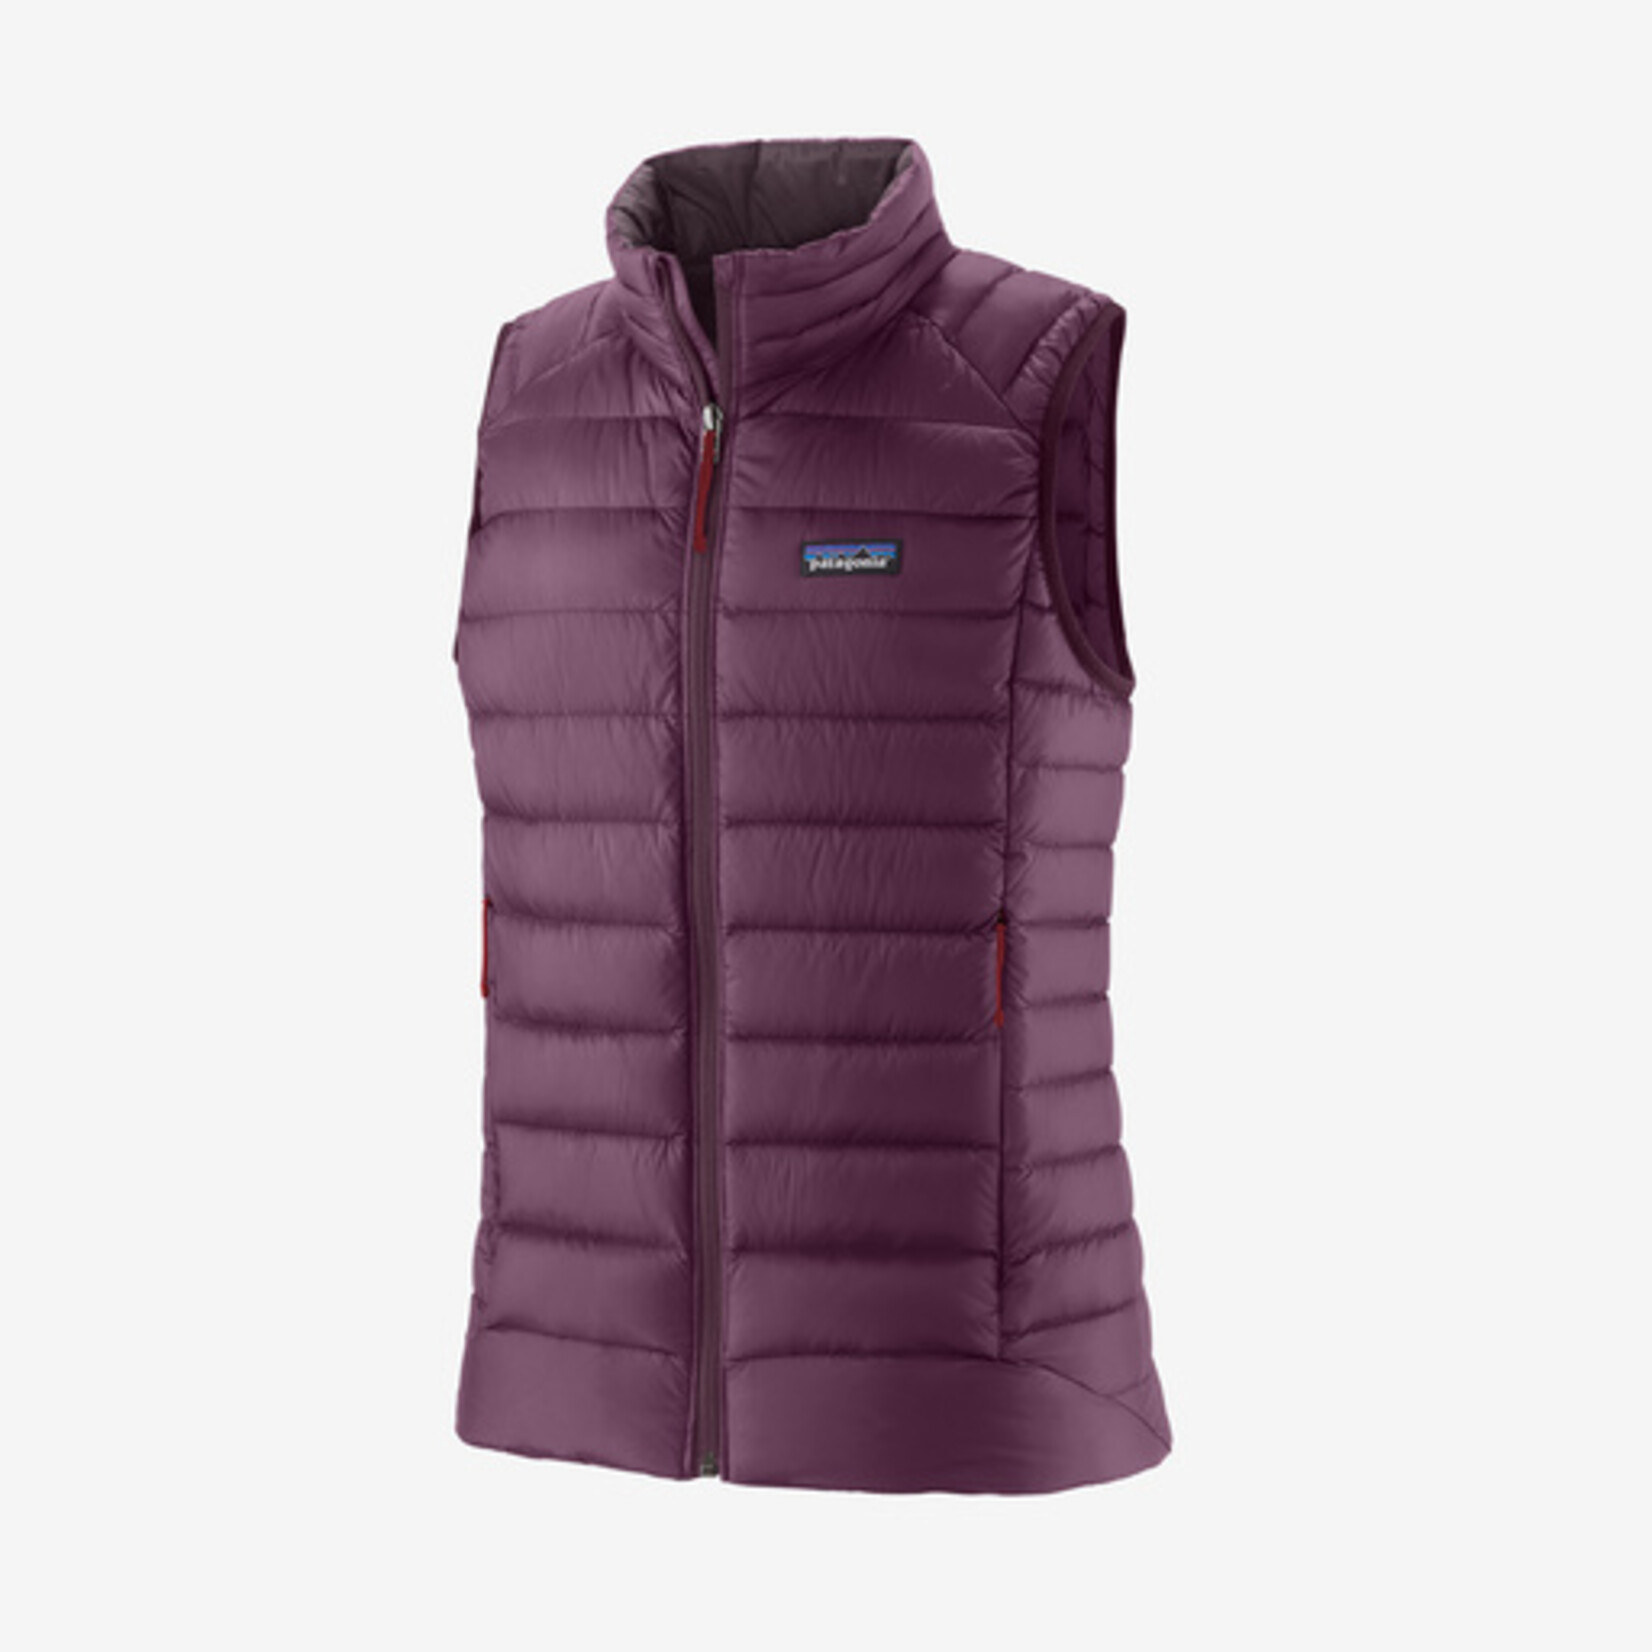 Patagonia W’s Down sweater vest